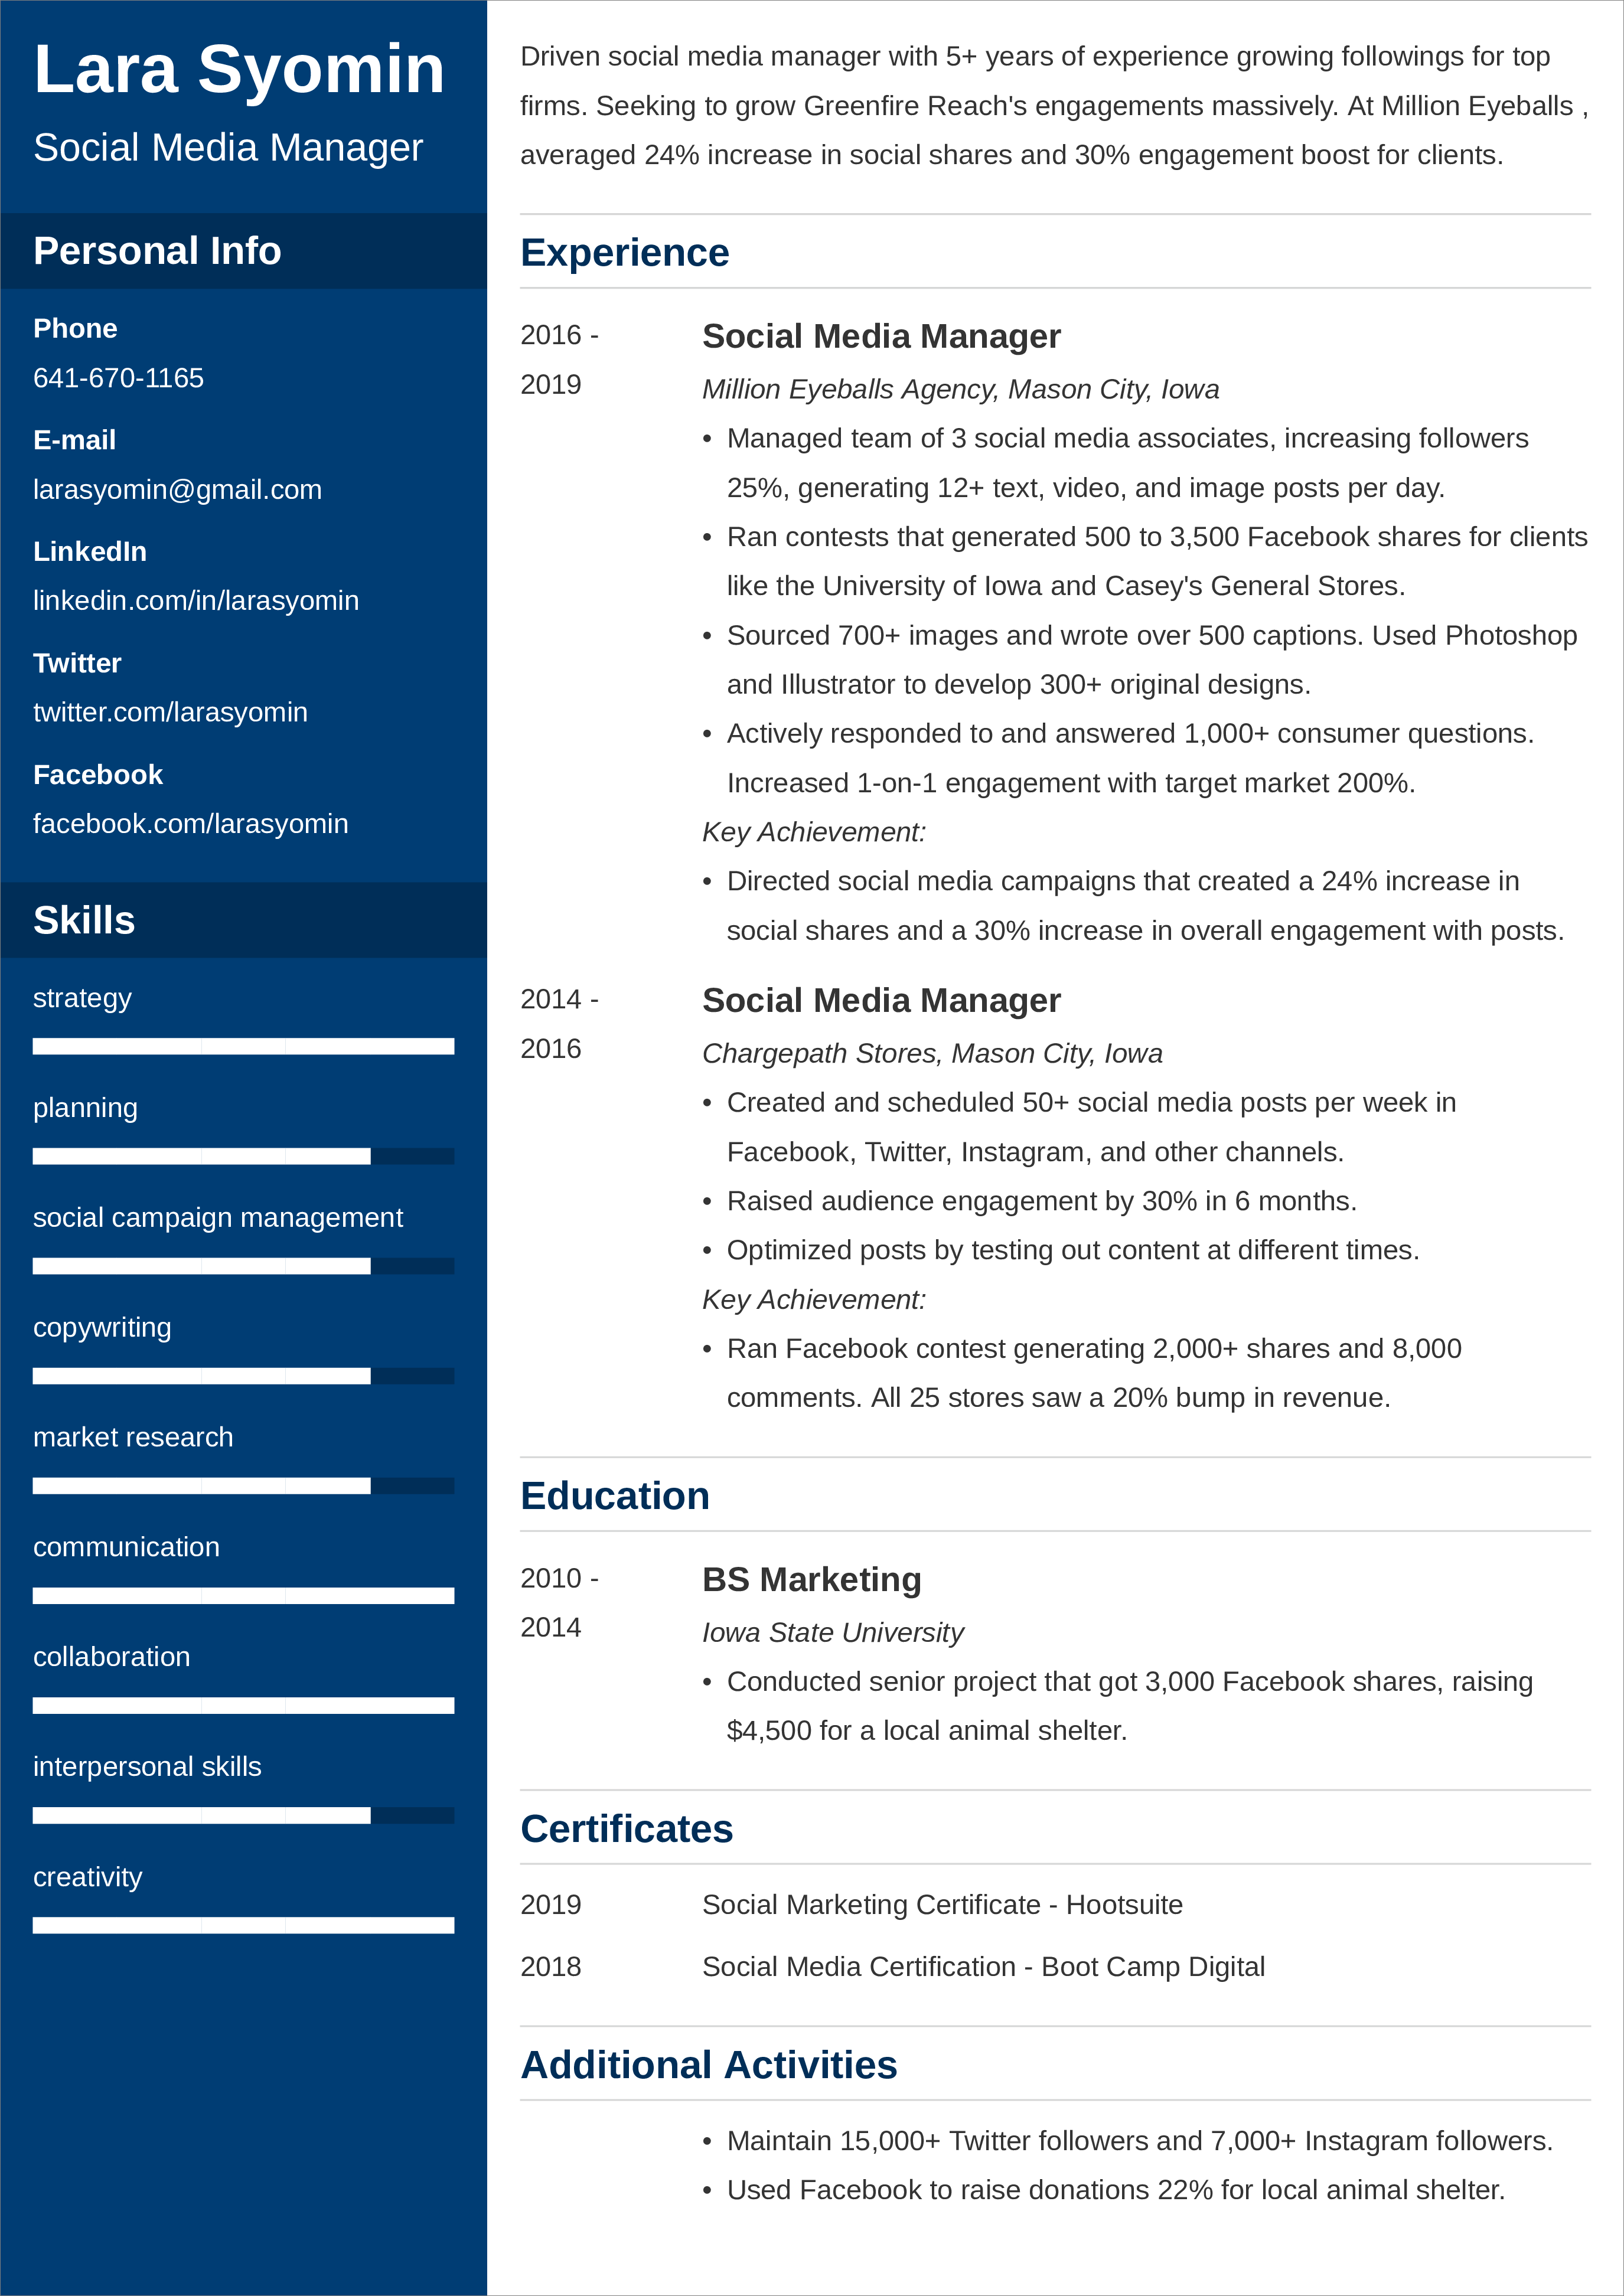 Social Media Manager Resume—Sample and 25+ Writing Tips